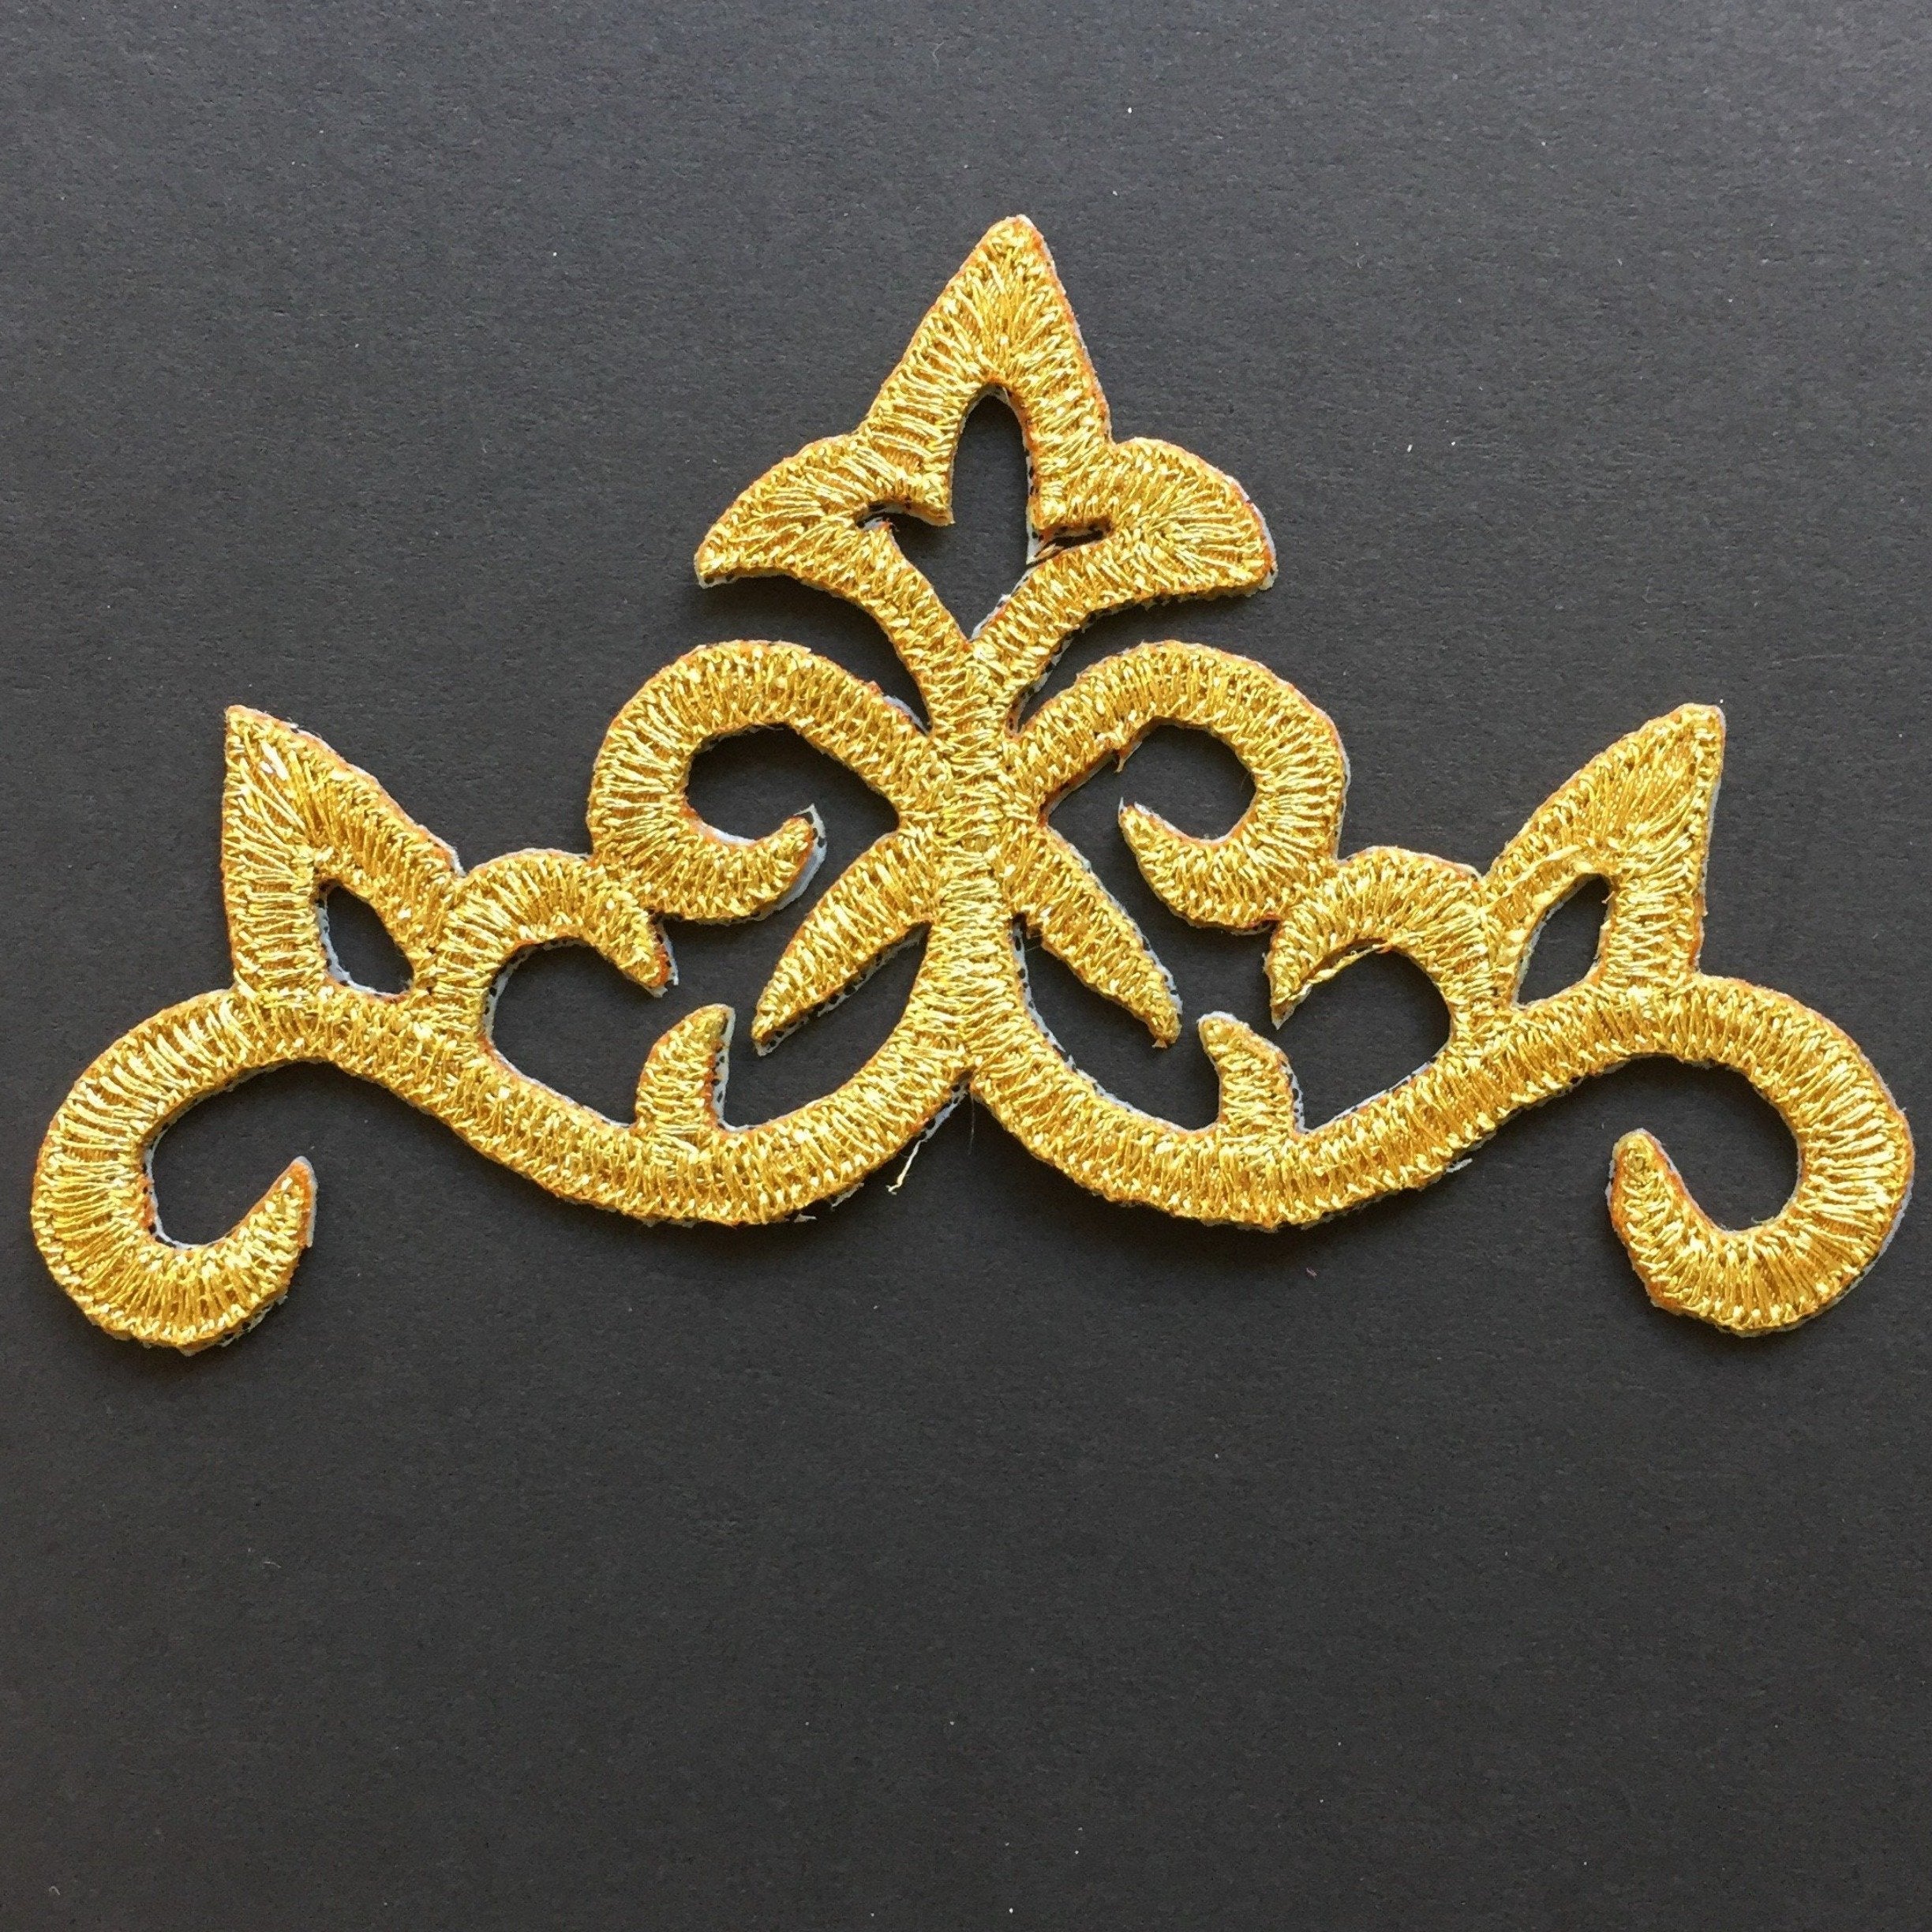 Baroque style iron on applique embroidered with metallic gold thread.  Great for cosplay and historical costumes.